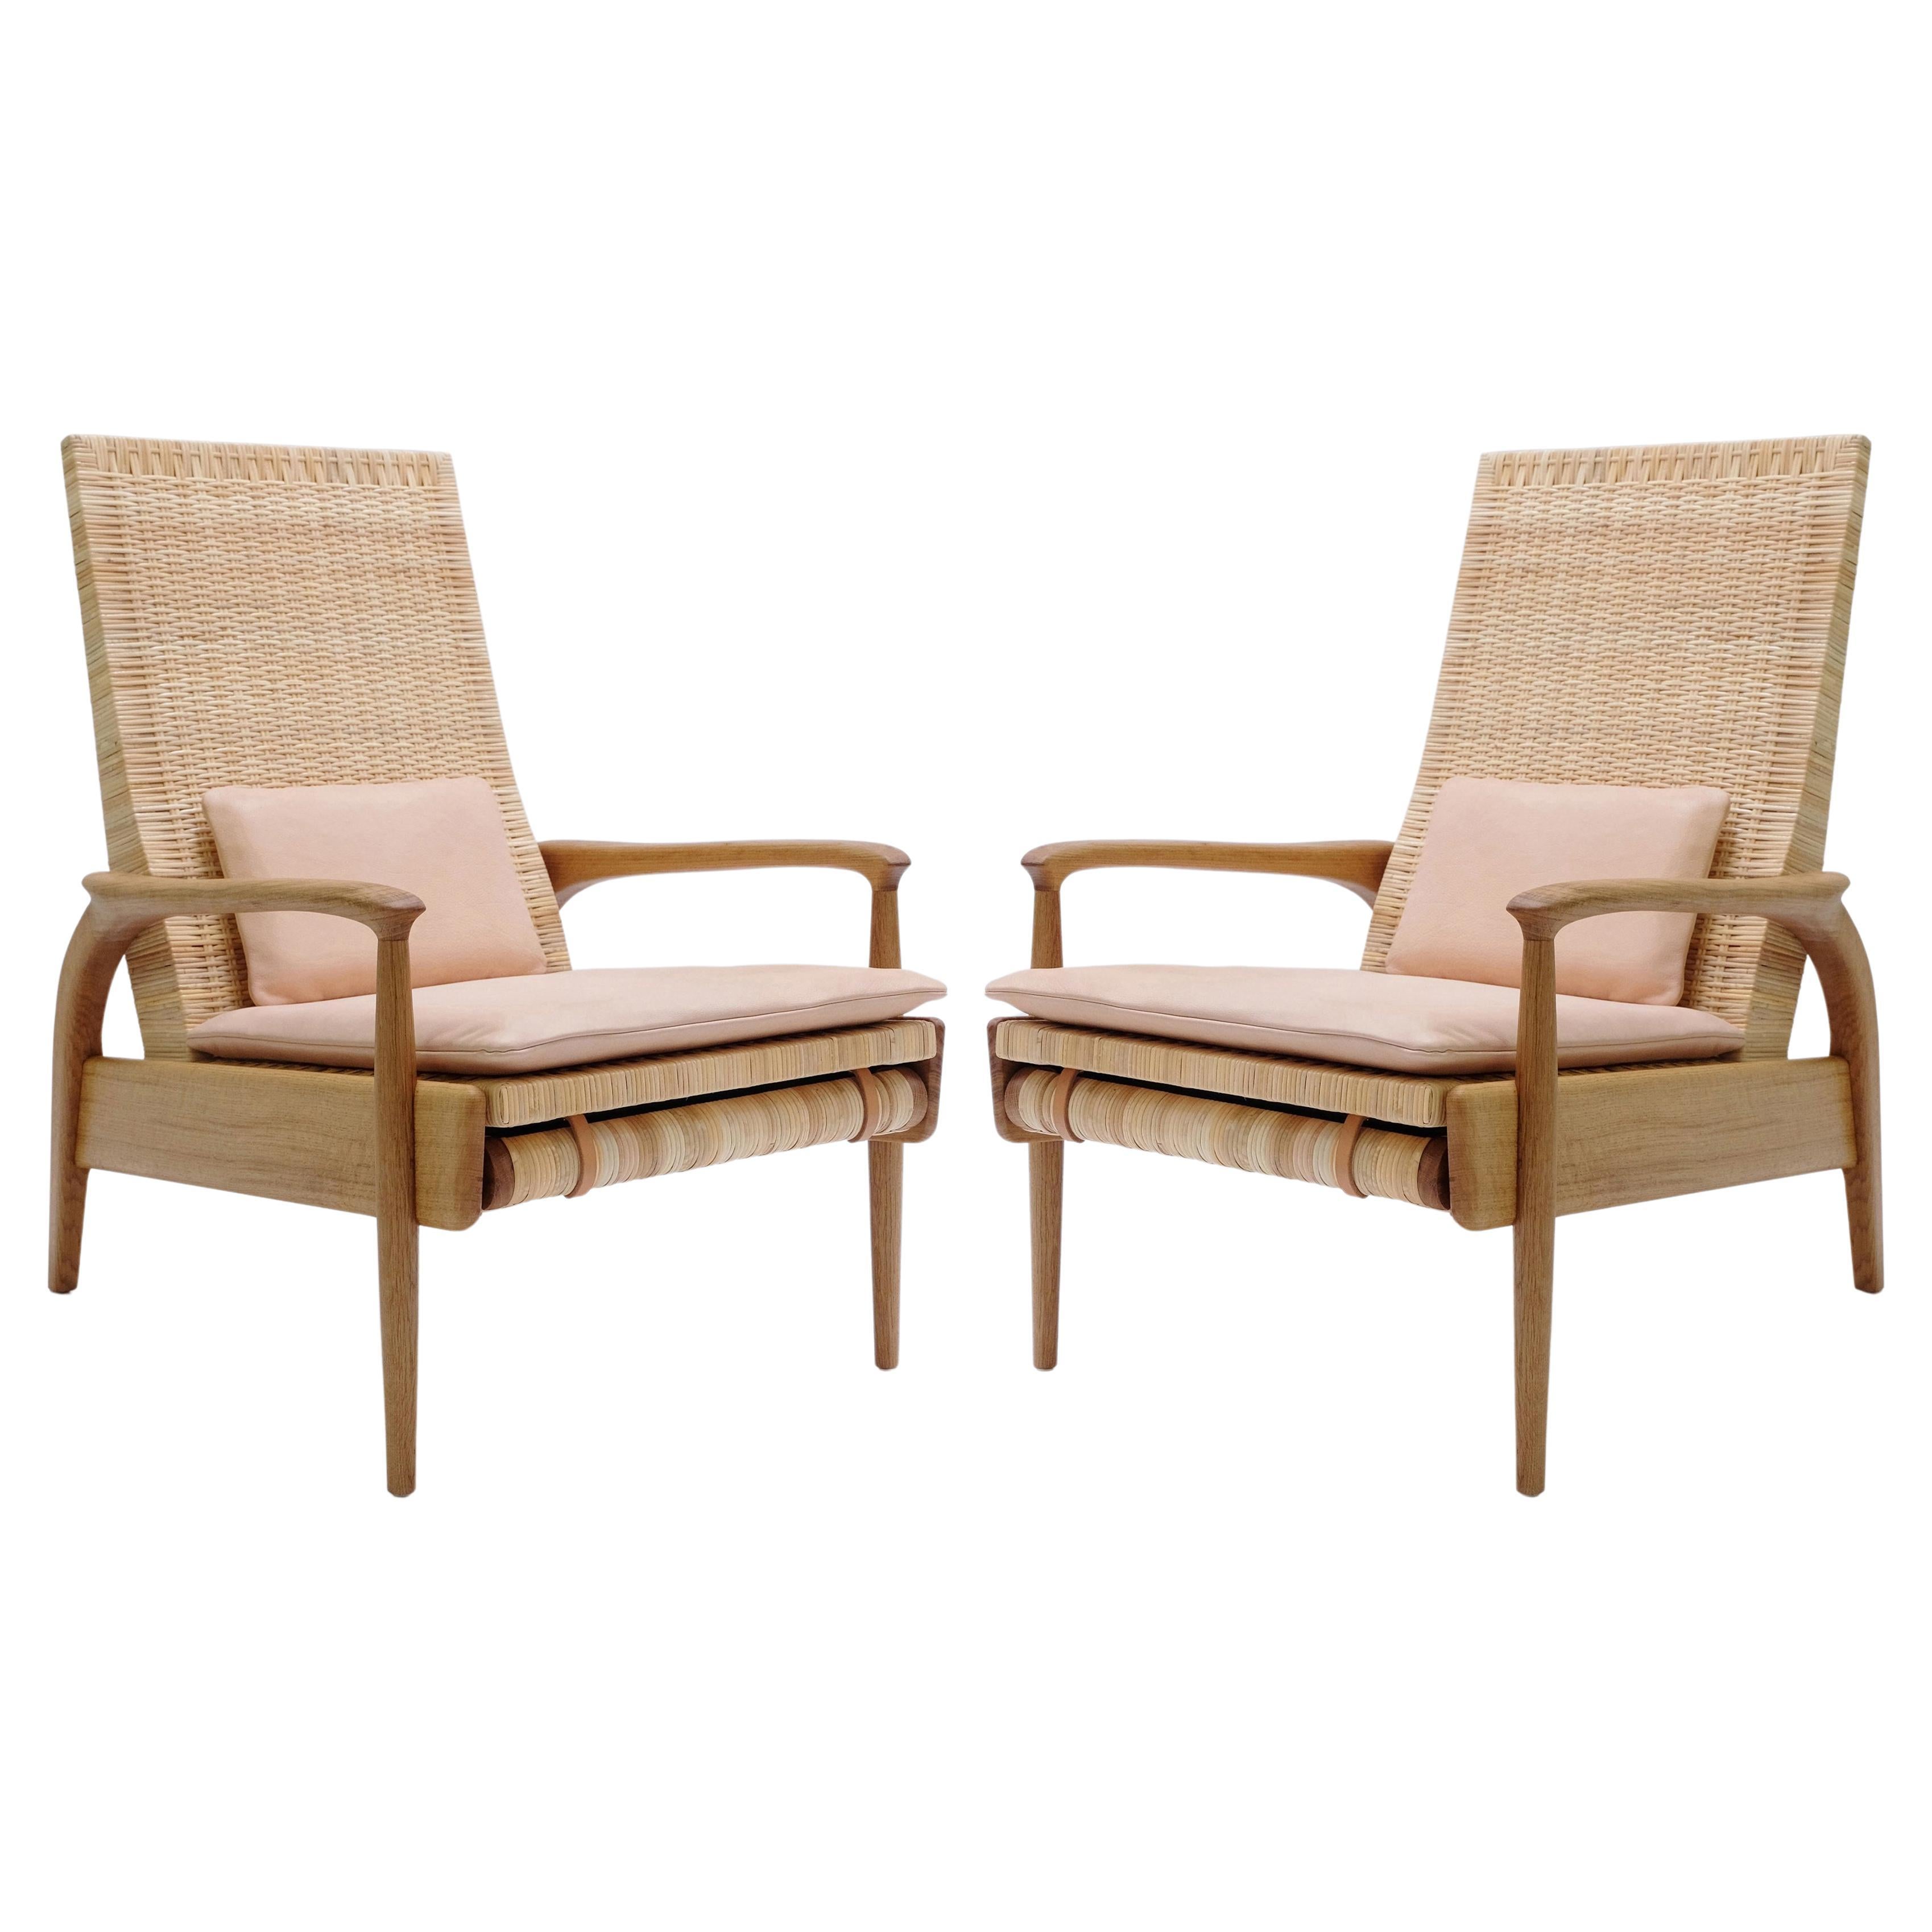 Pair of Reclining Armchairs, Solid Oak, Handwoven Natural Cane, Leather Cushions For Sale